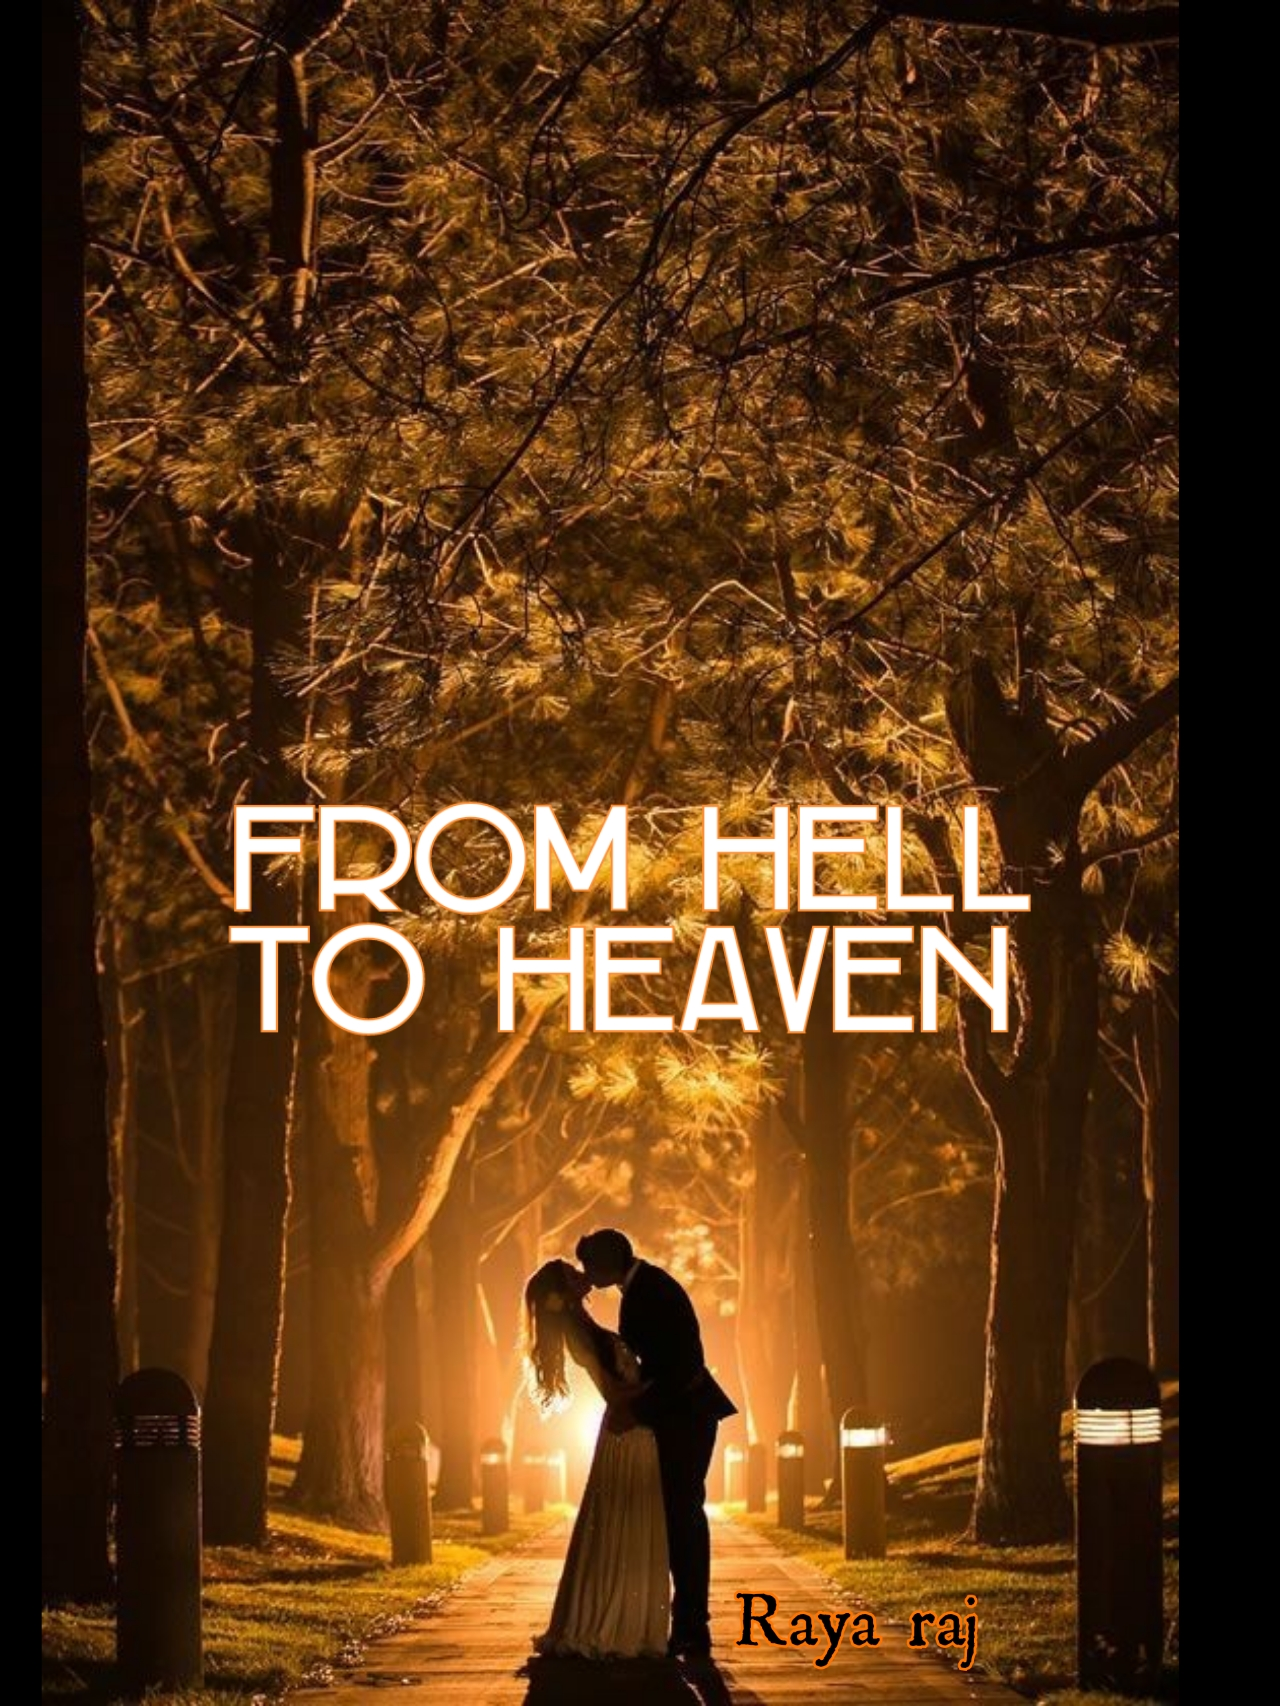 From hell to heaven